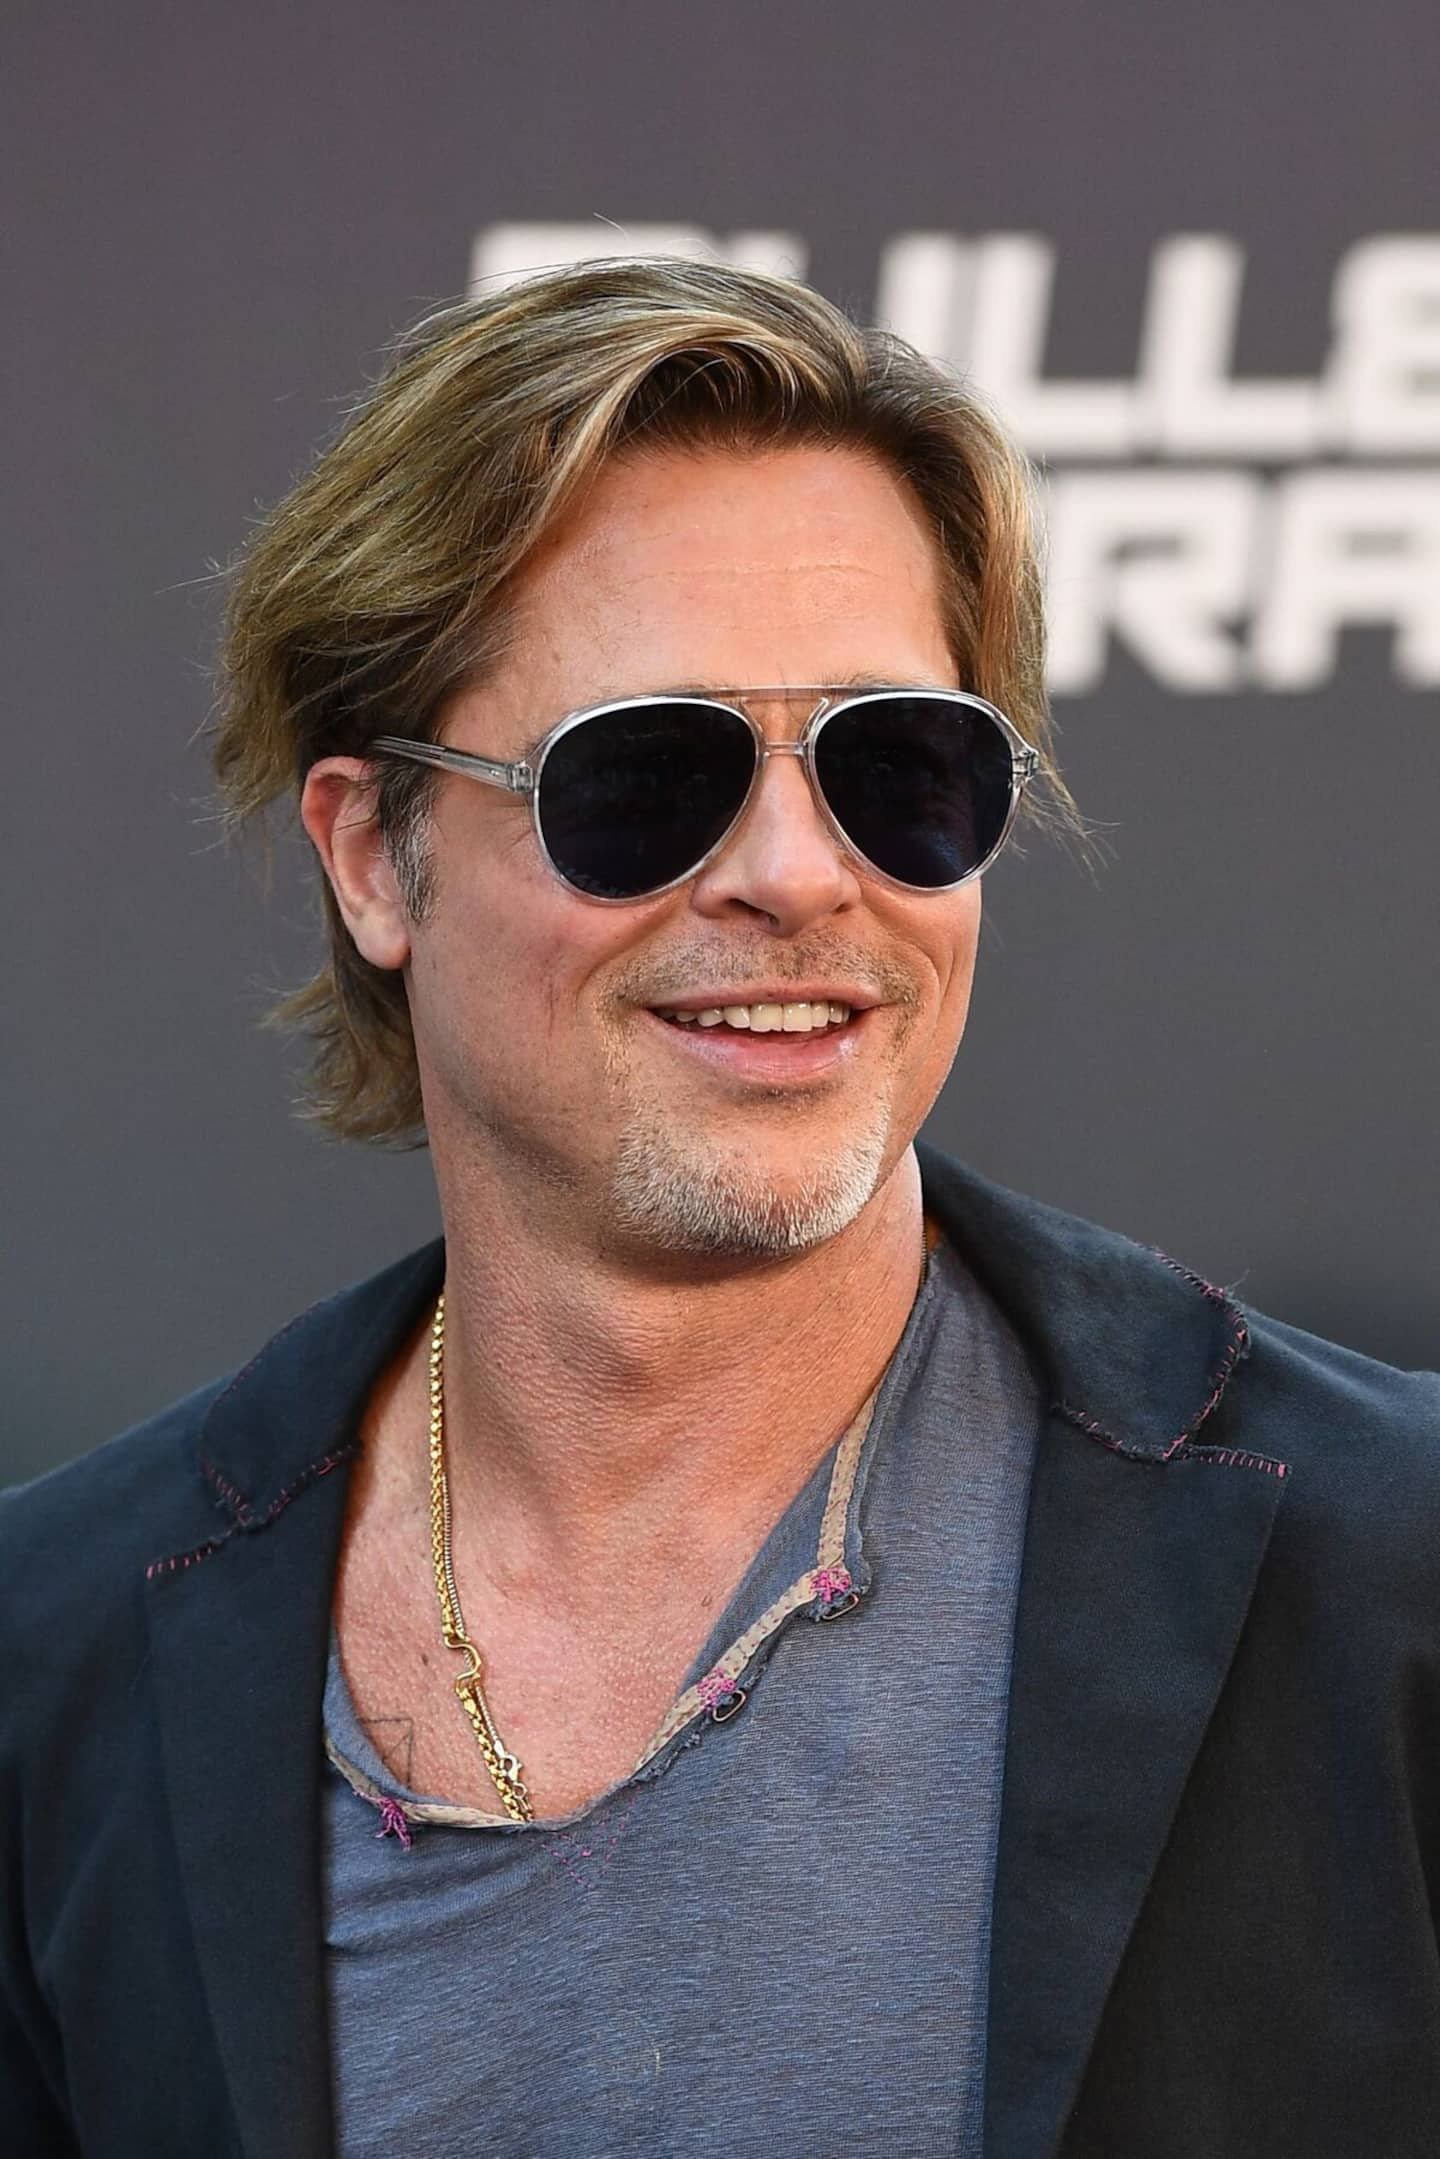 Retirement time hasn't come yet for Brad Pitt